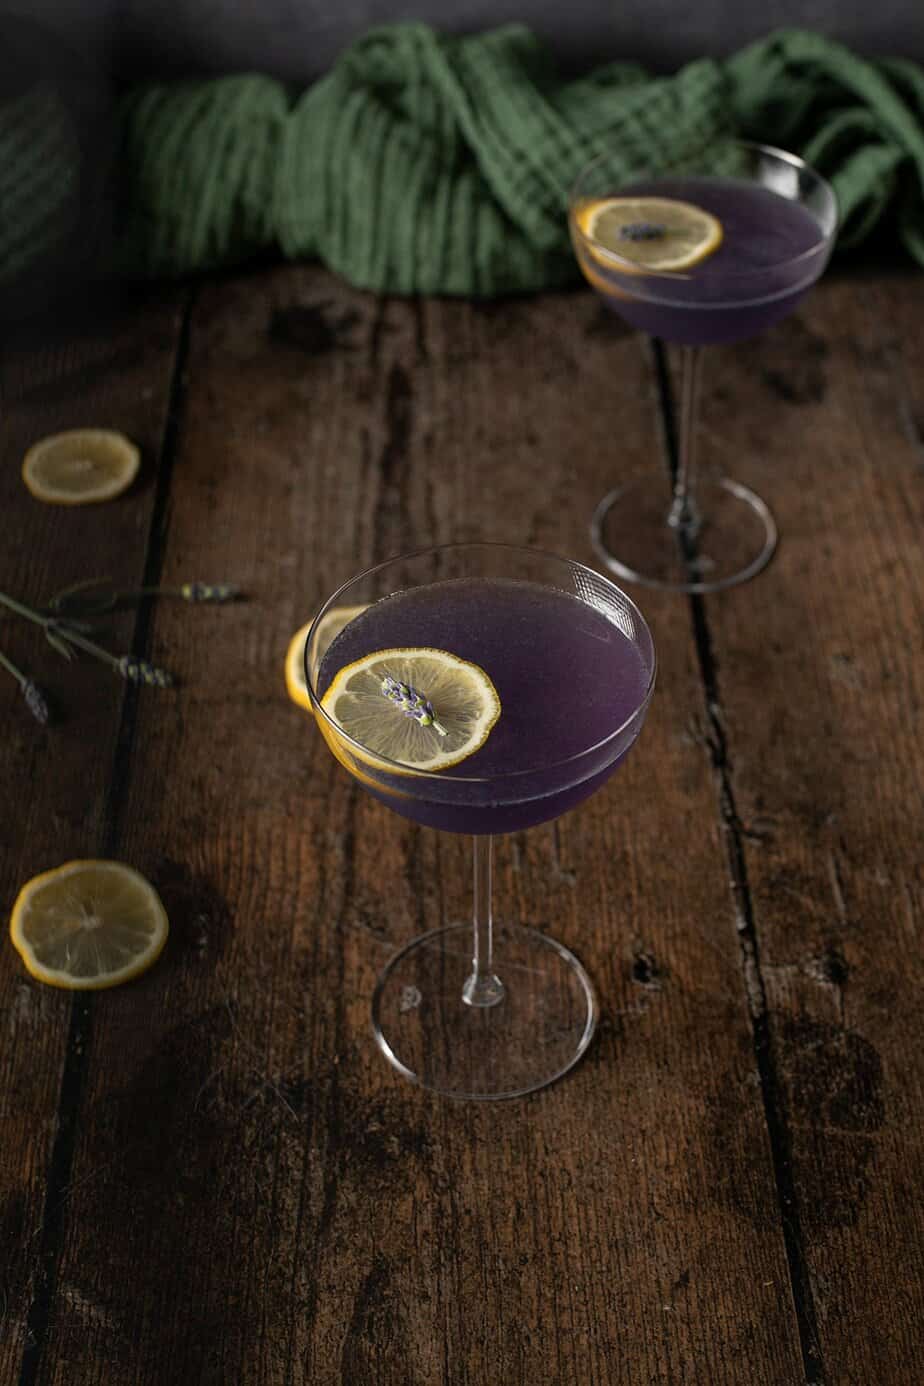 45 degree angle view of a coupe glass full of lavender martini